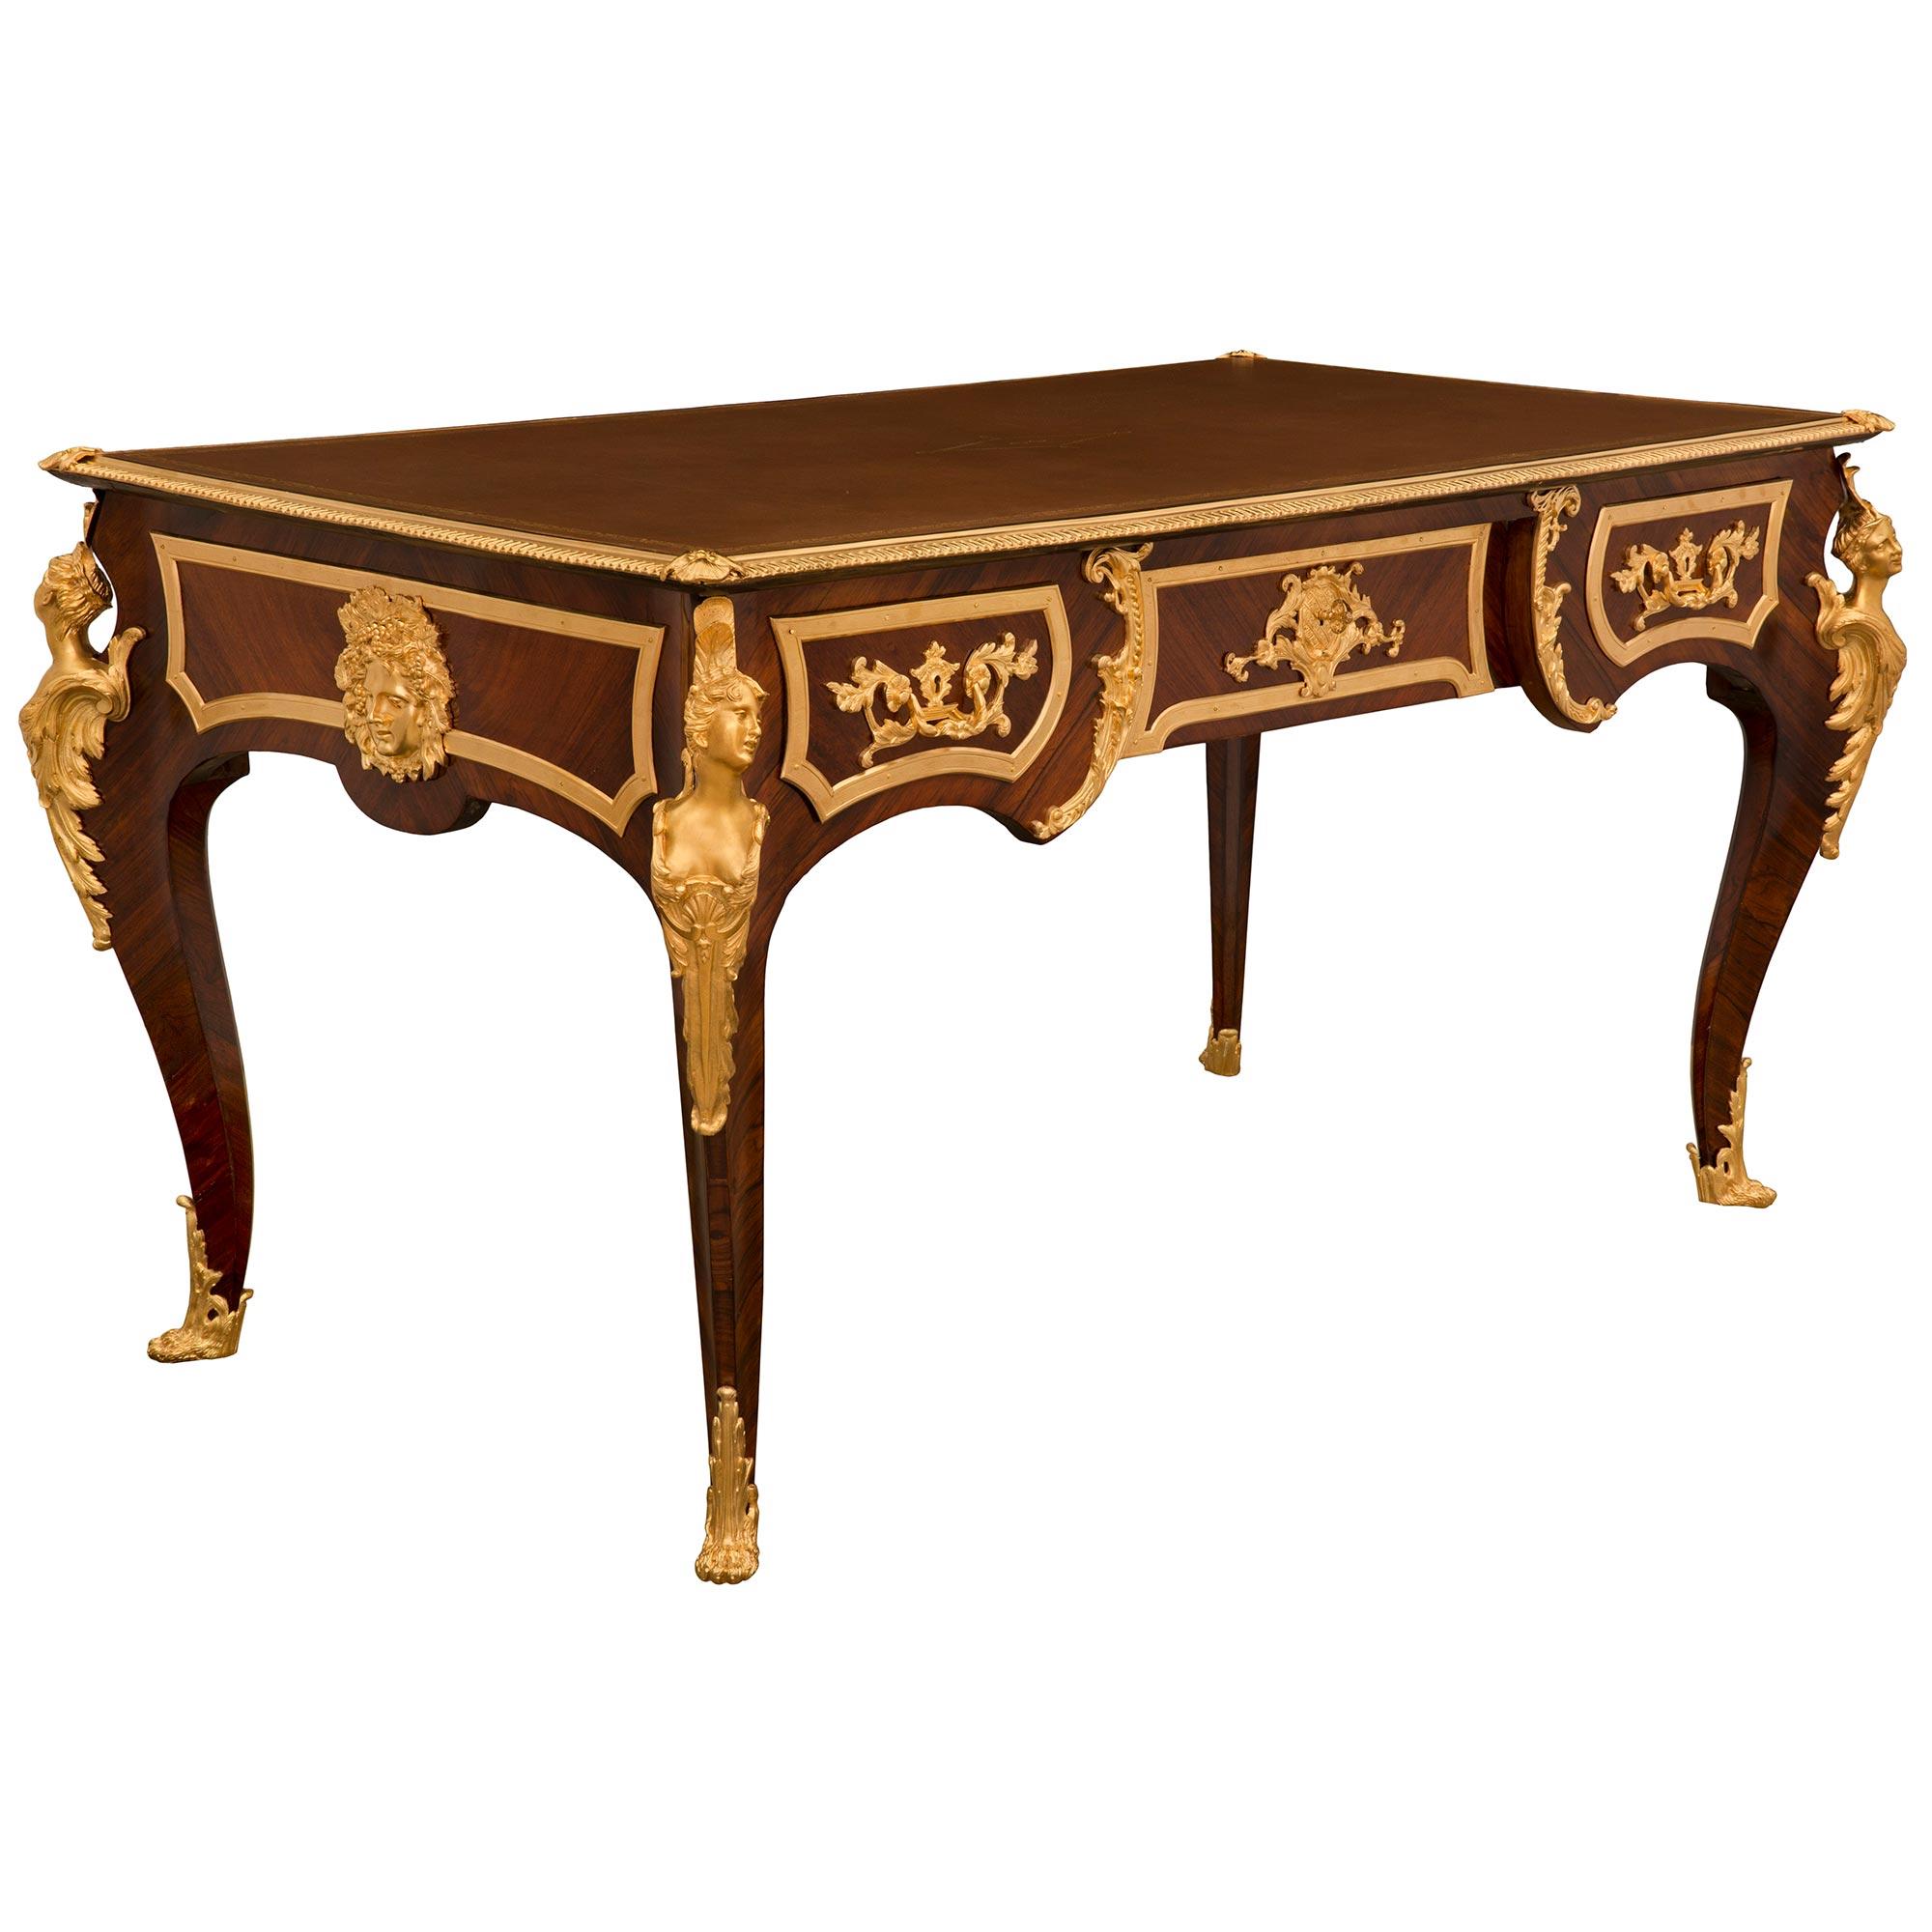 French 19th Century Louis XV St. Kingwood and Ormolu Desk Possibly by François L In Good Condition For Sale In West Palm Beach, FL